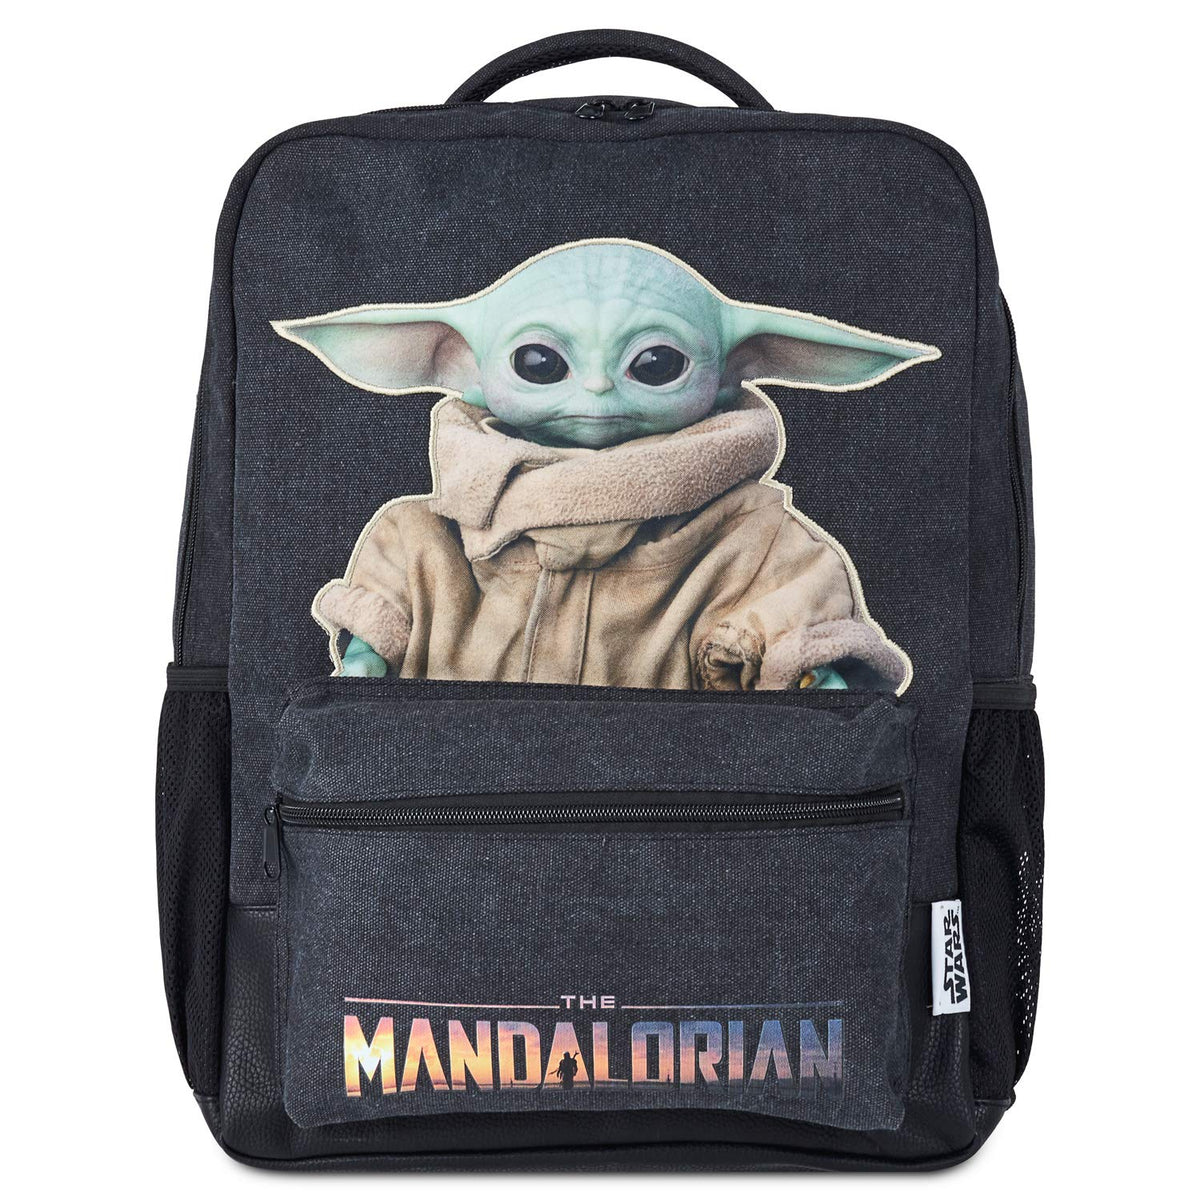 Disney® Official Baby Yoda Backpack Mandalorian Grogu The Child | Large Star Wars Backpack - Suitable for Older Kids, Teenagers & Adults 48cm x 35cm x 13cm